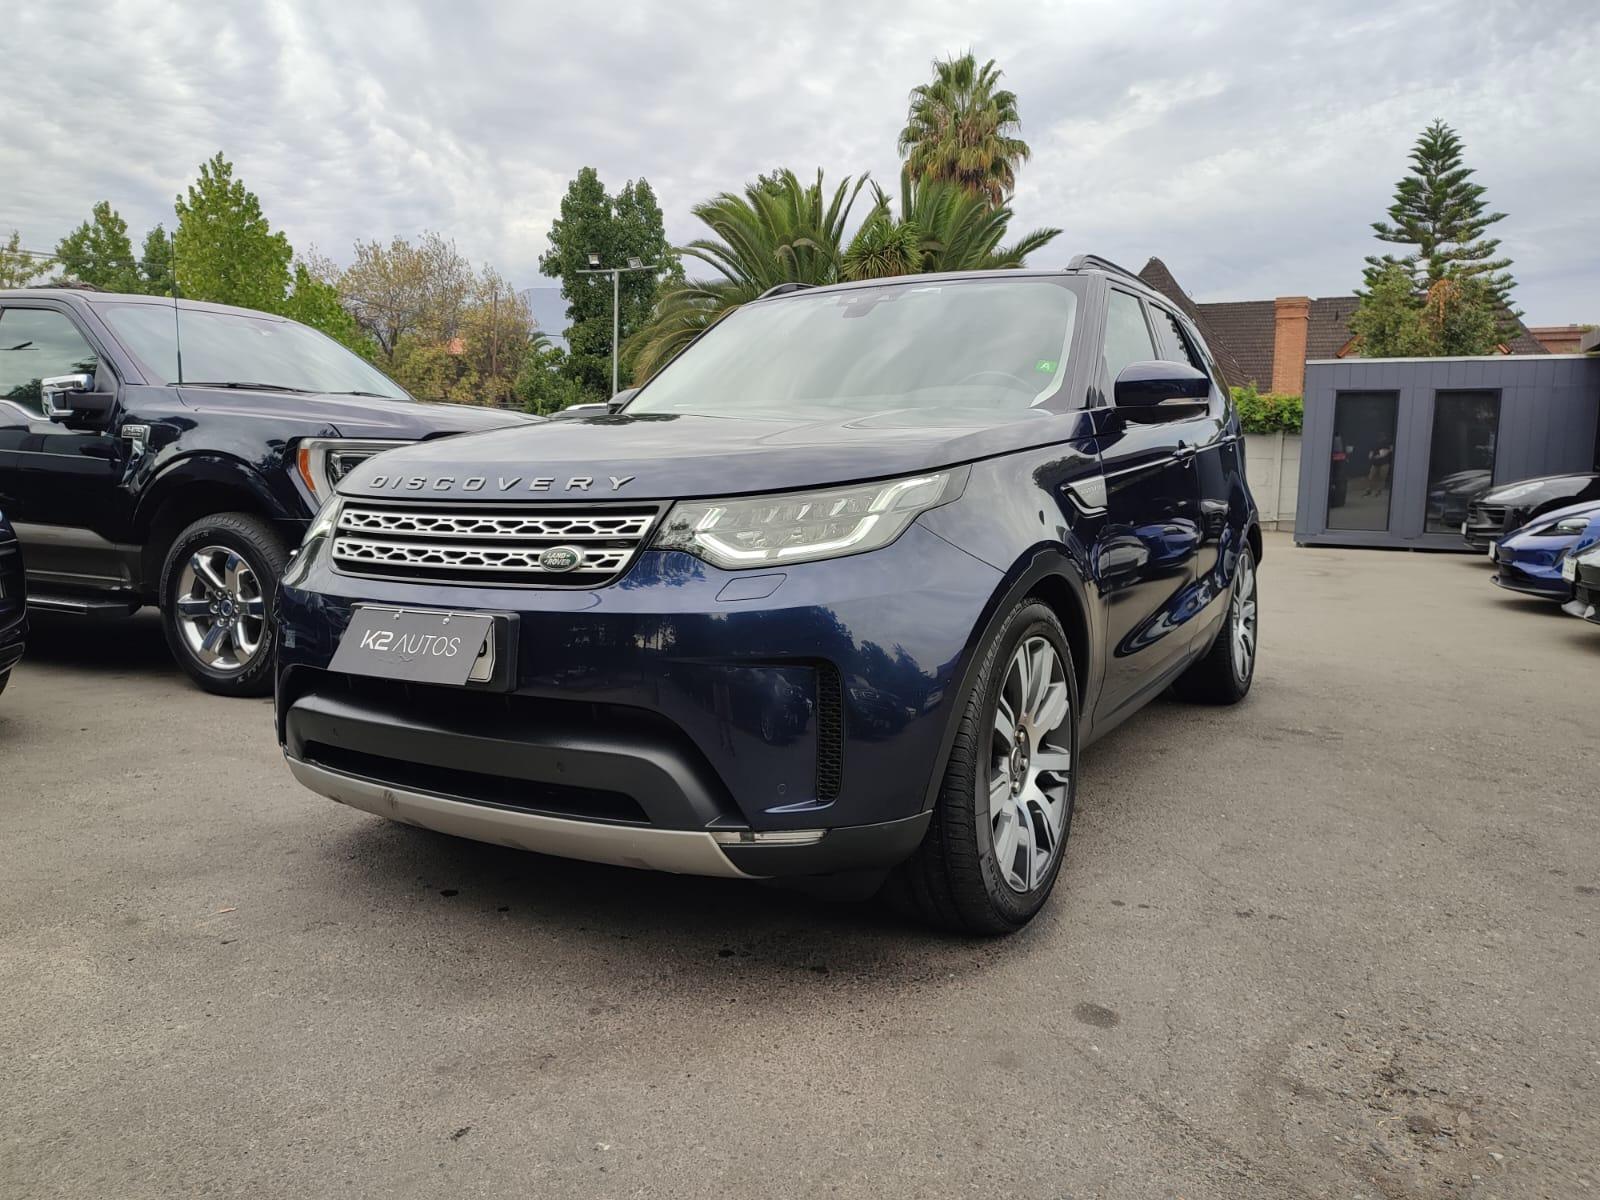 LAND ROVER DISCOVERY 5 HSE SDV6 3.0 4WD 2018 FULL EQUIPO, IMPECABLE - 